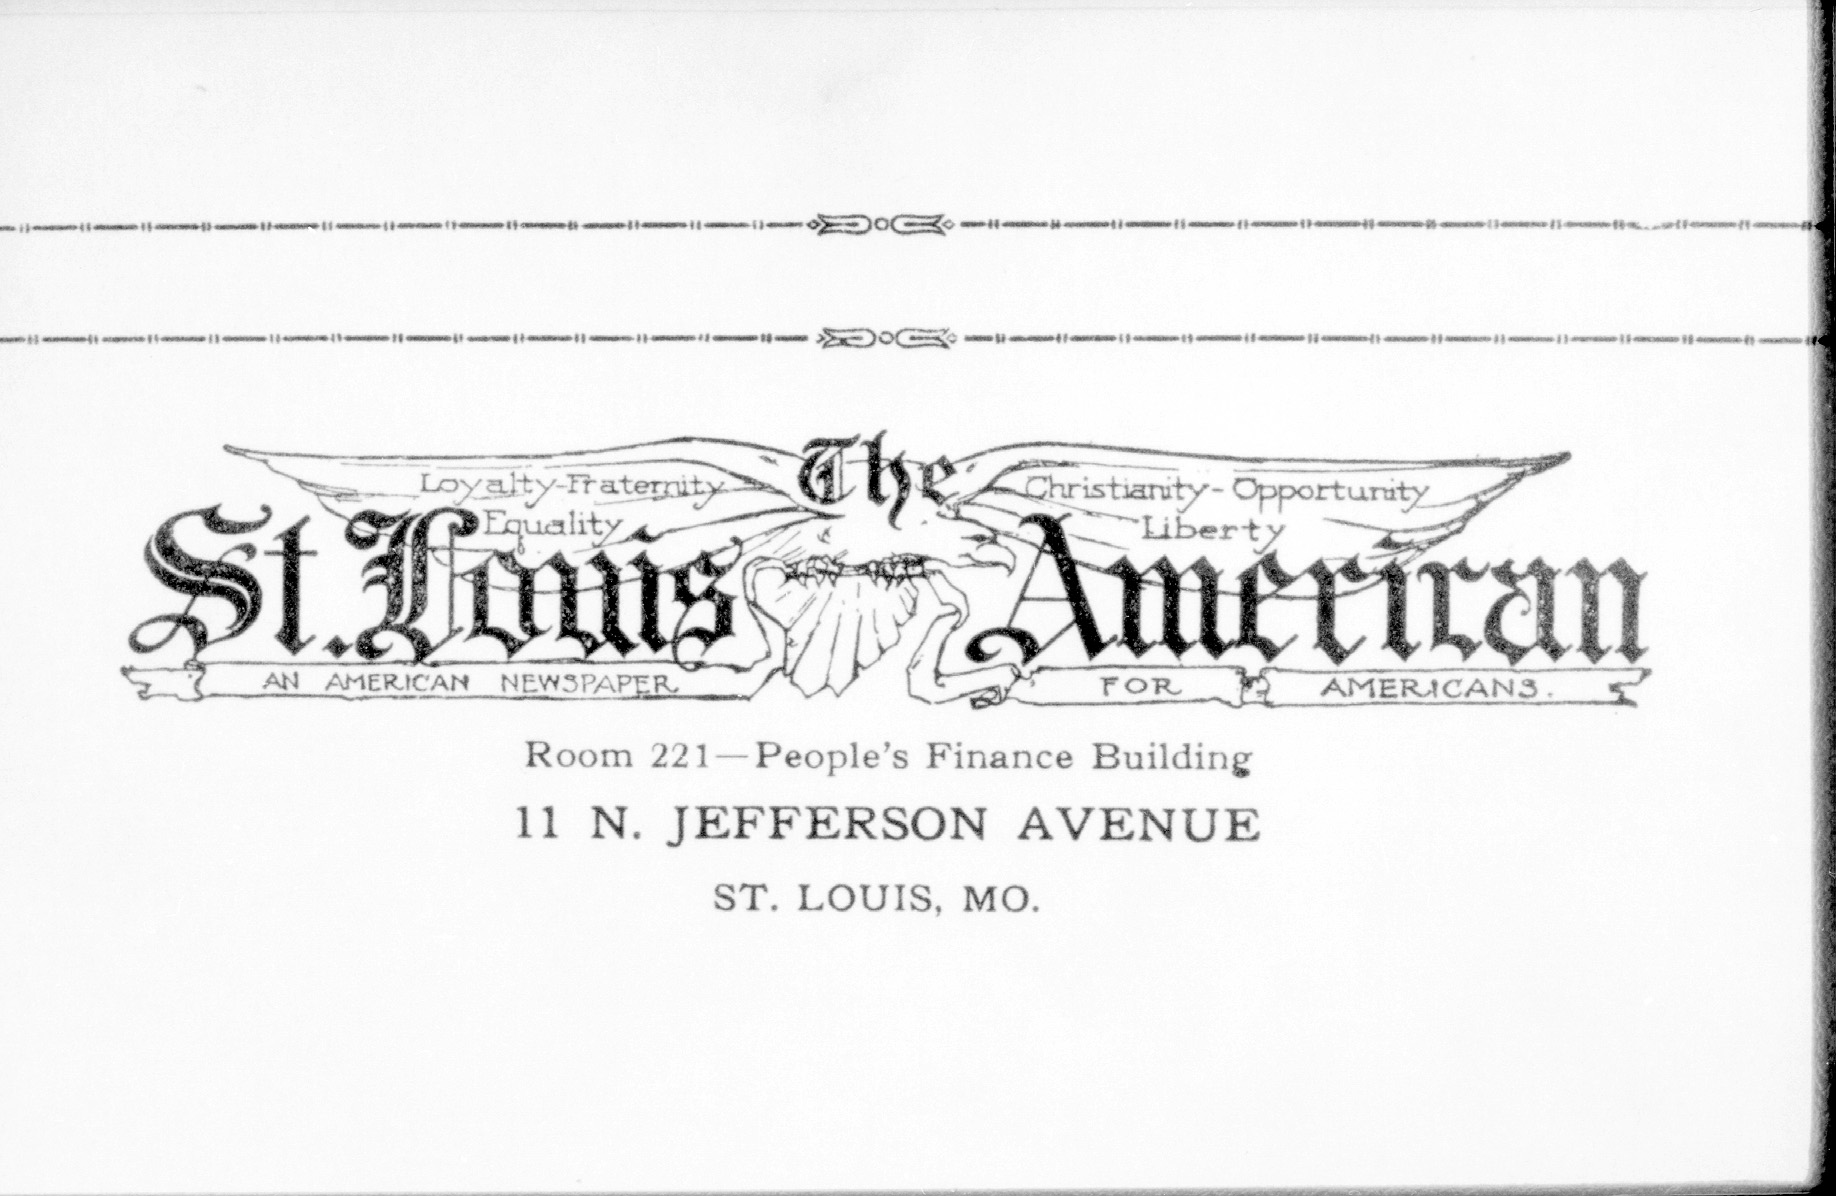 St. Louis American is Founded